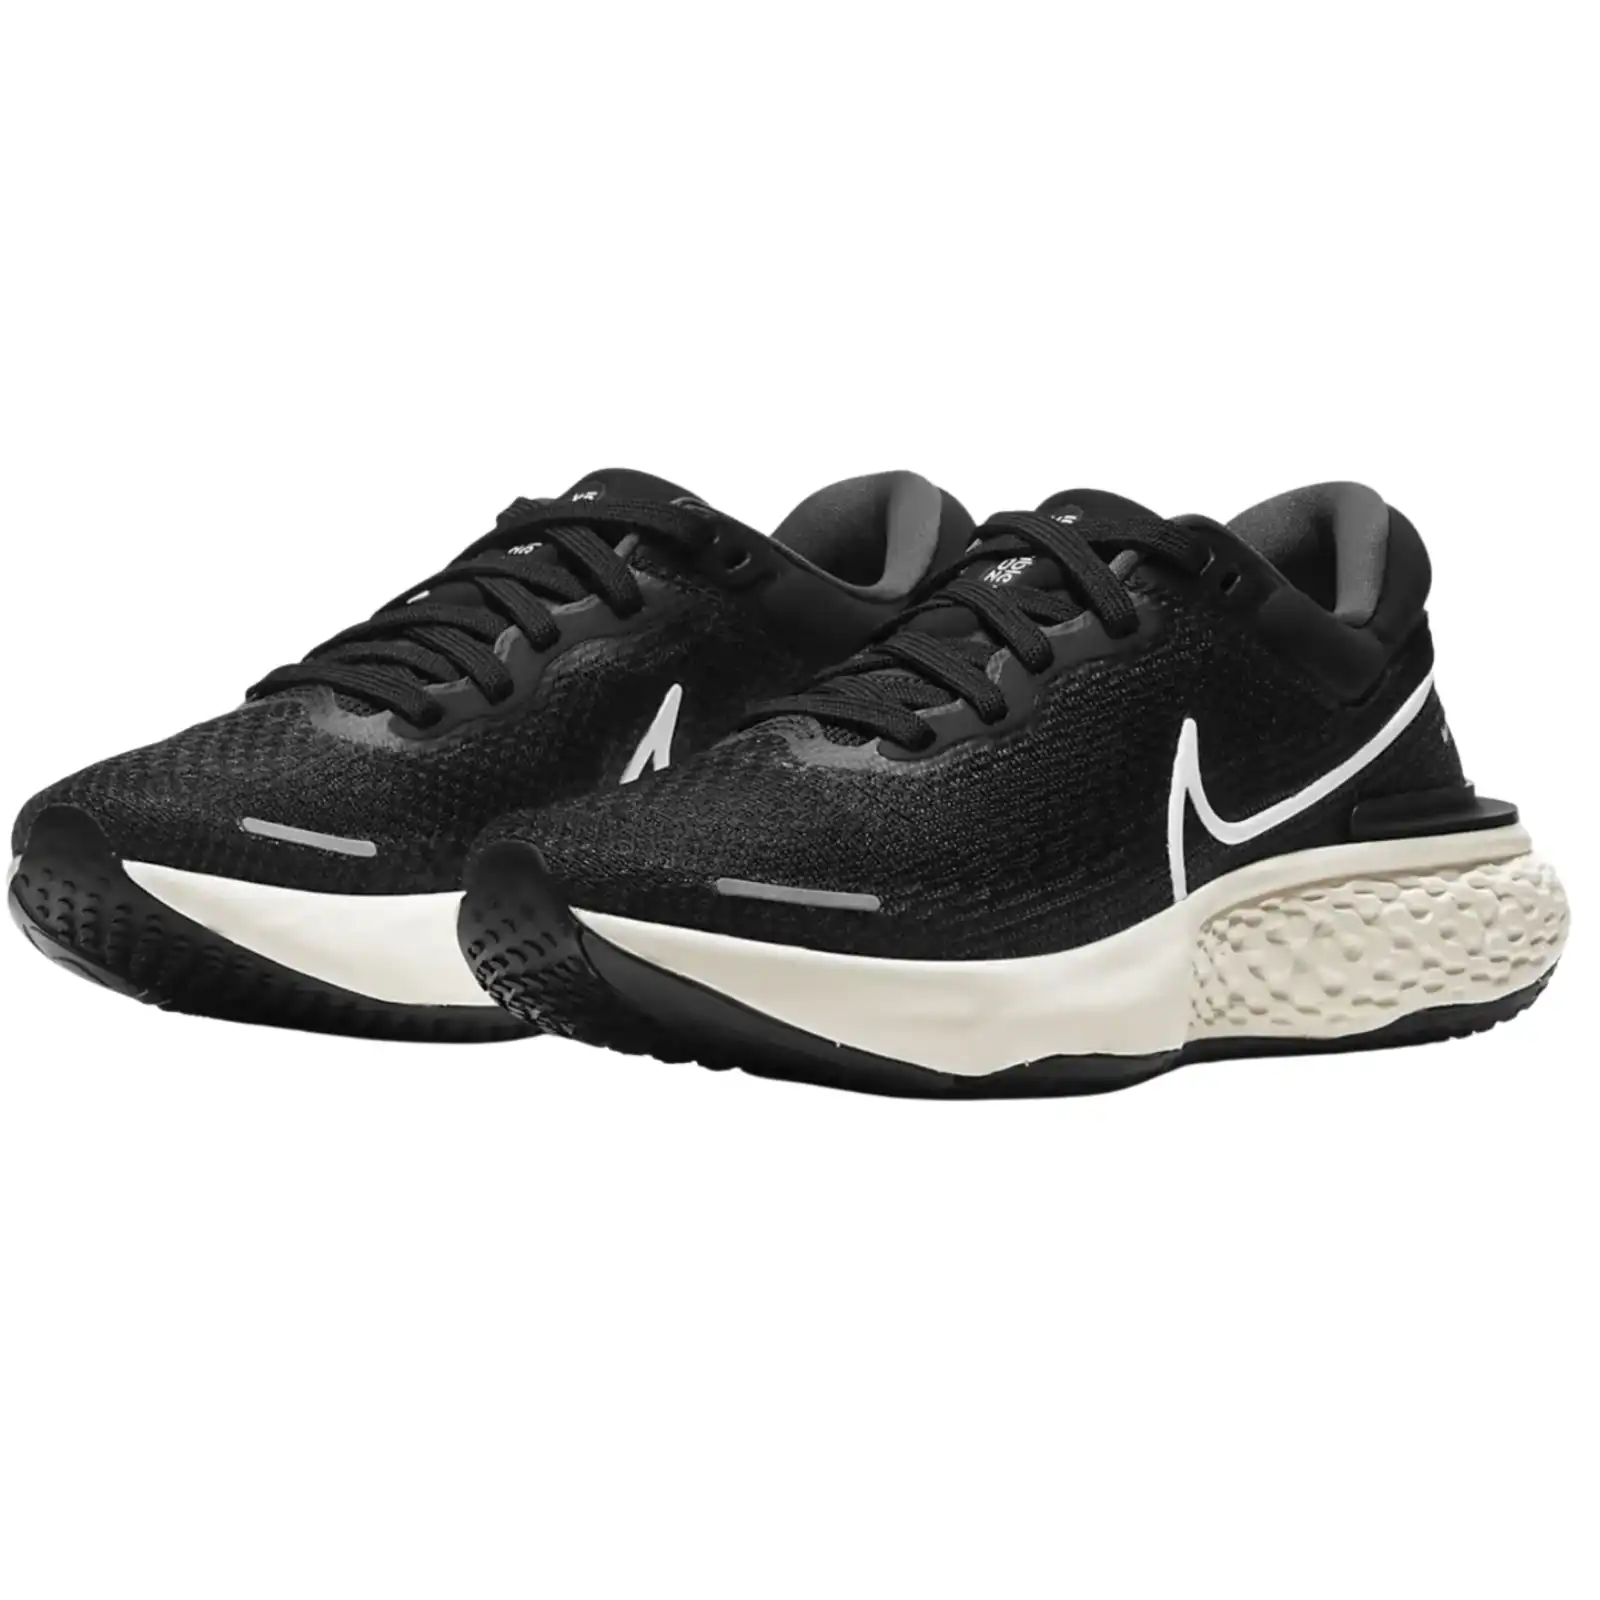 Nike Womens ZoomX Invincible Run Flyknit Sports Running Sneaker Shoes - Black/White-Iron Grey